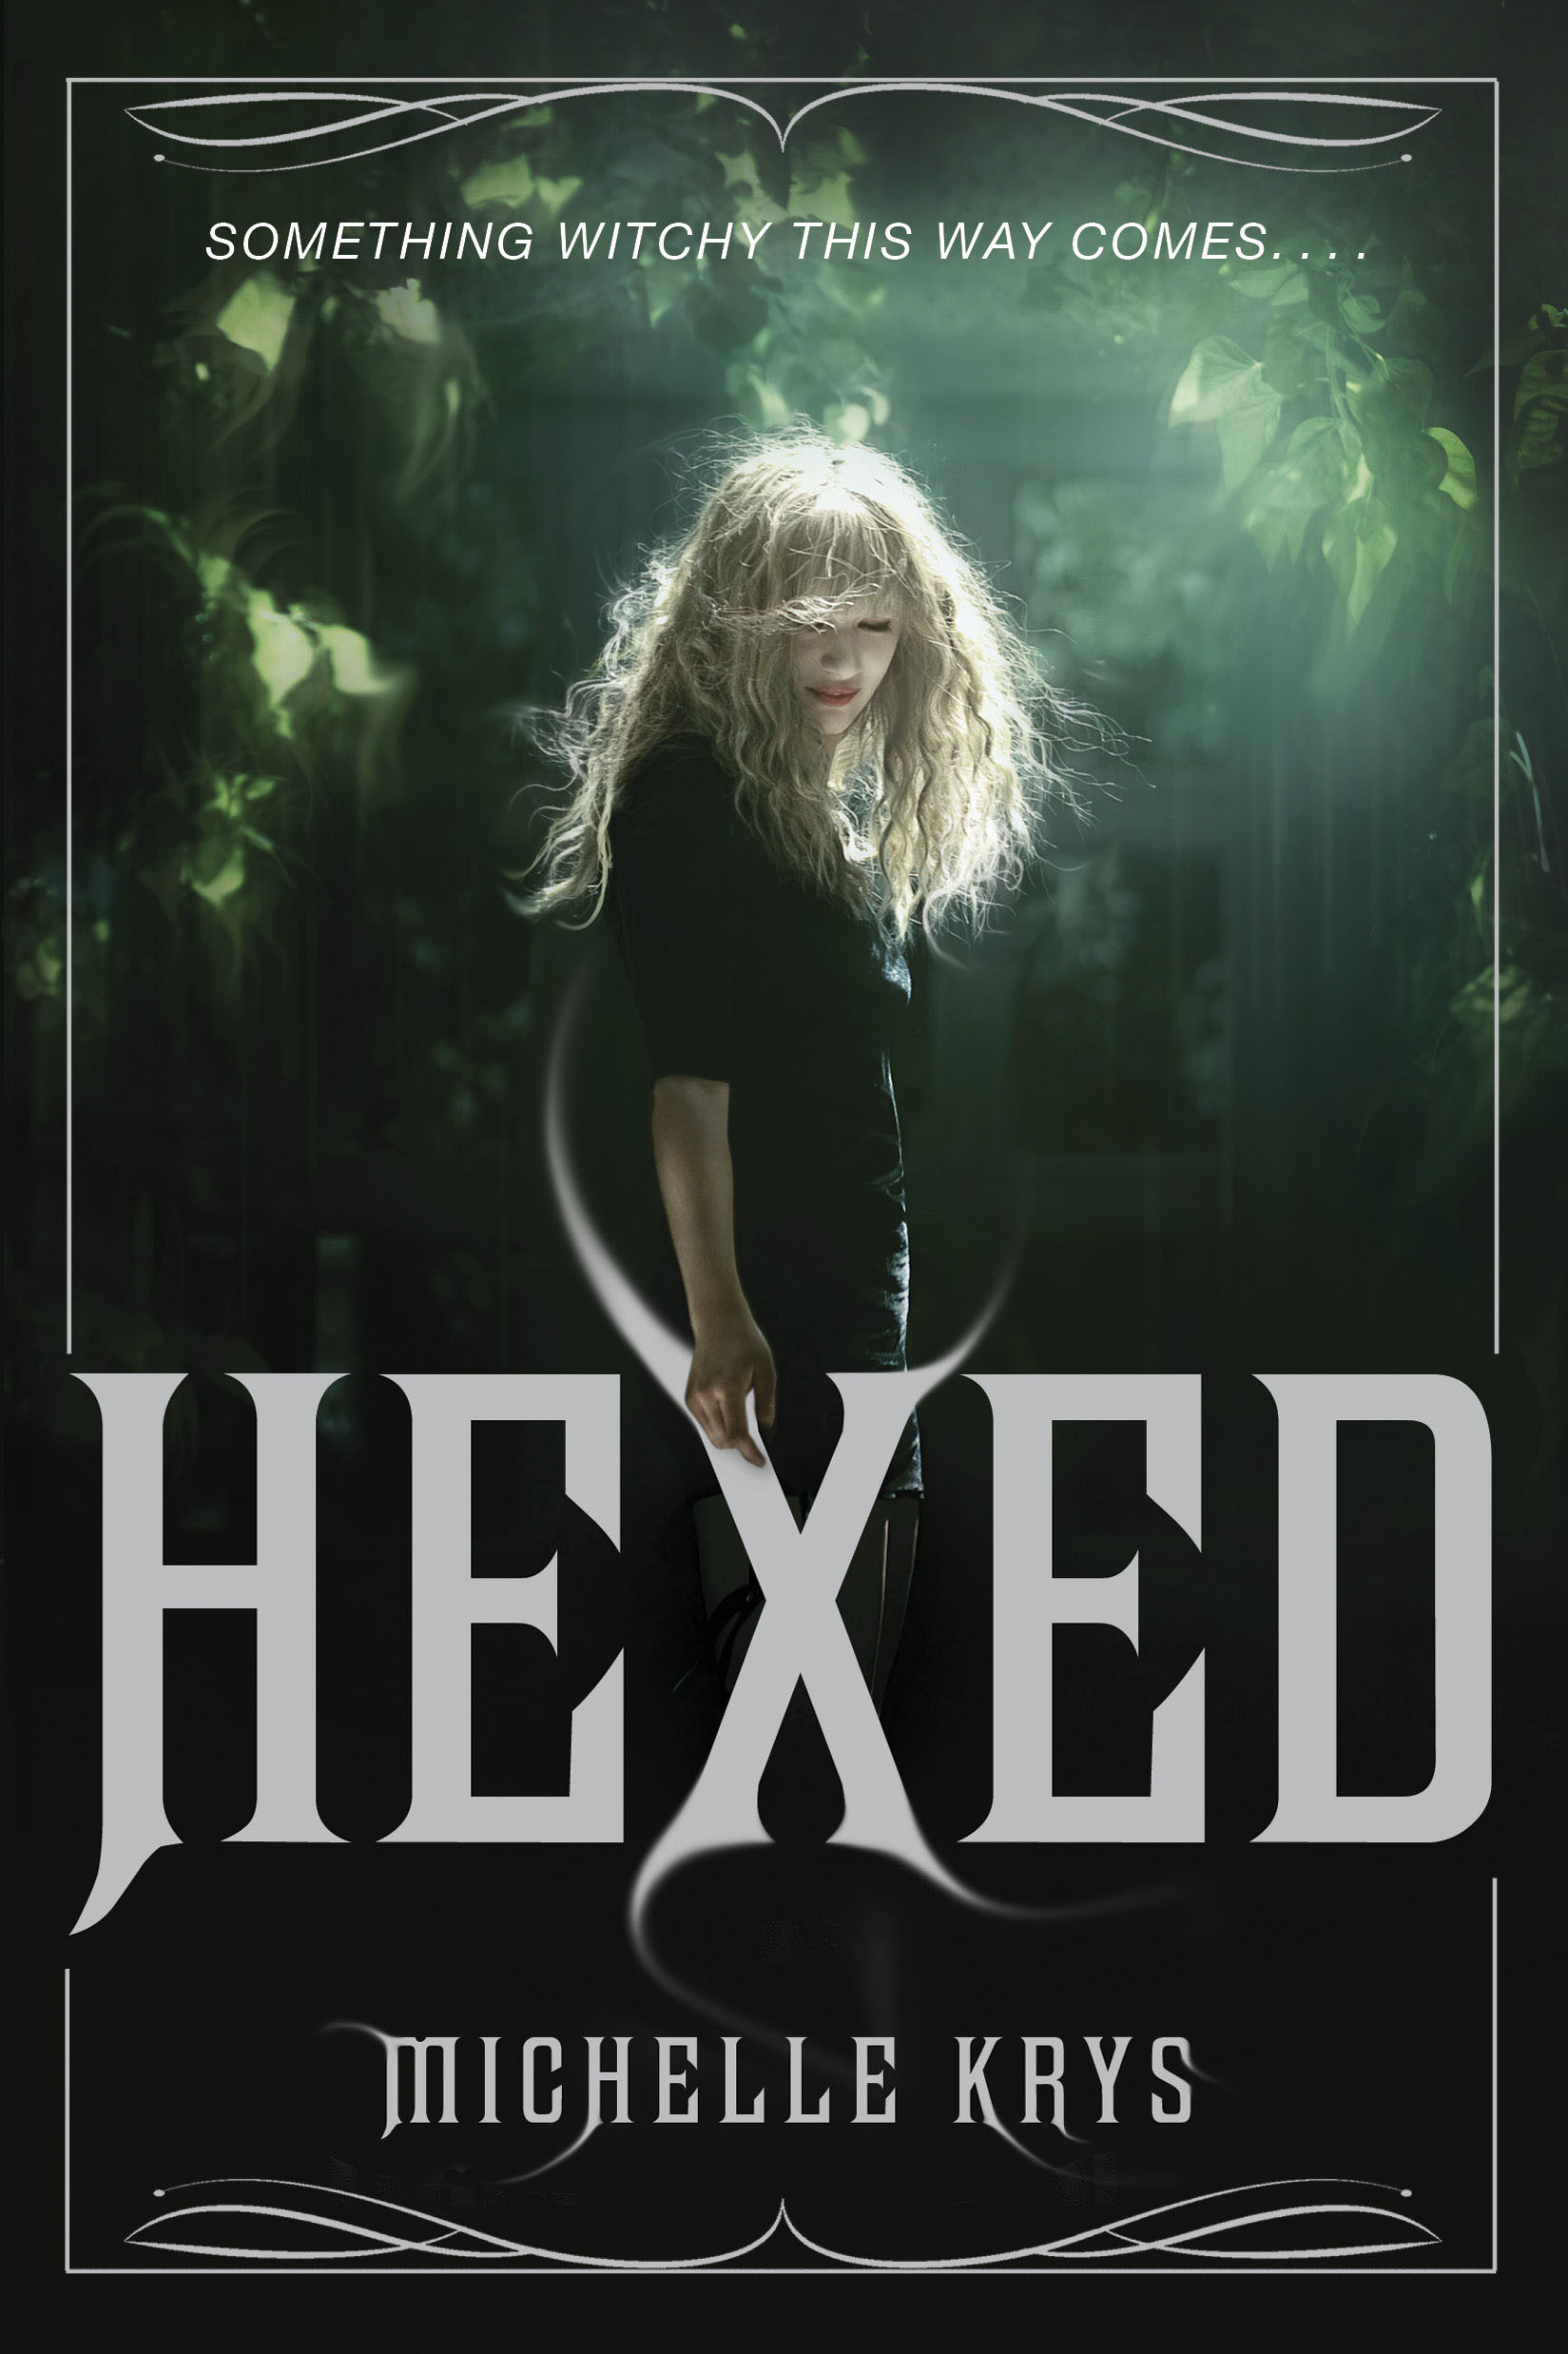 Hexed_cover_7_30_13